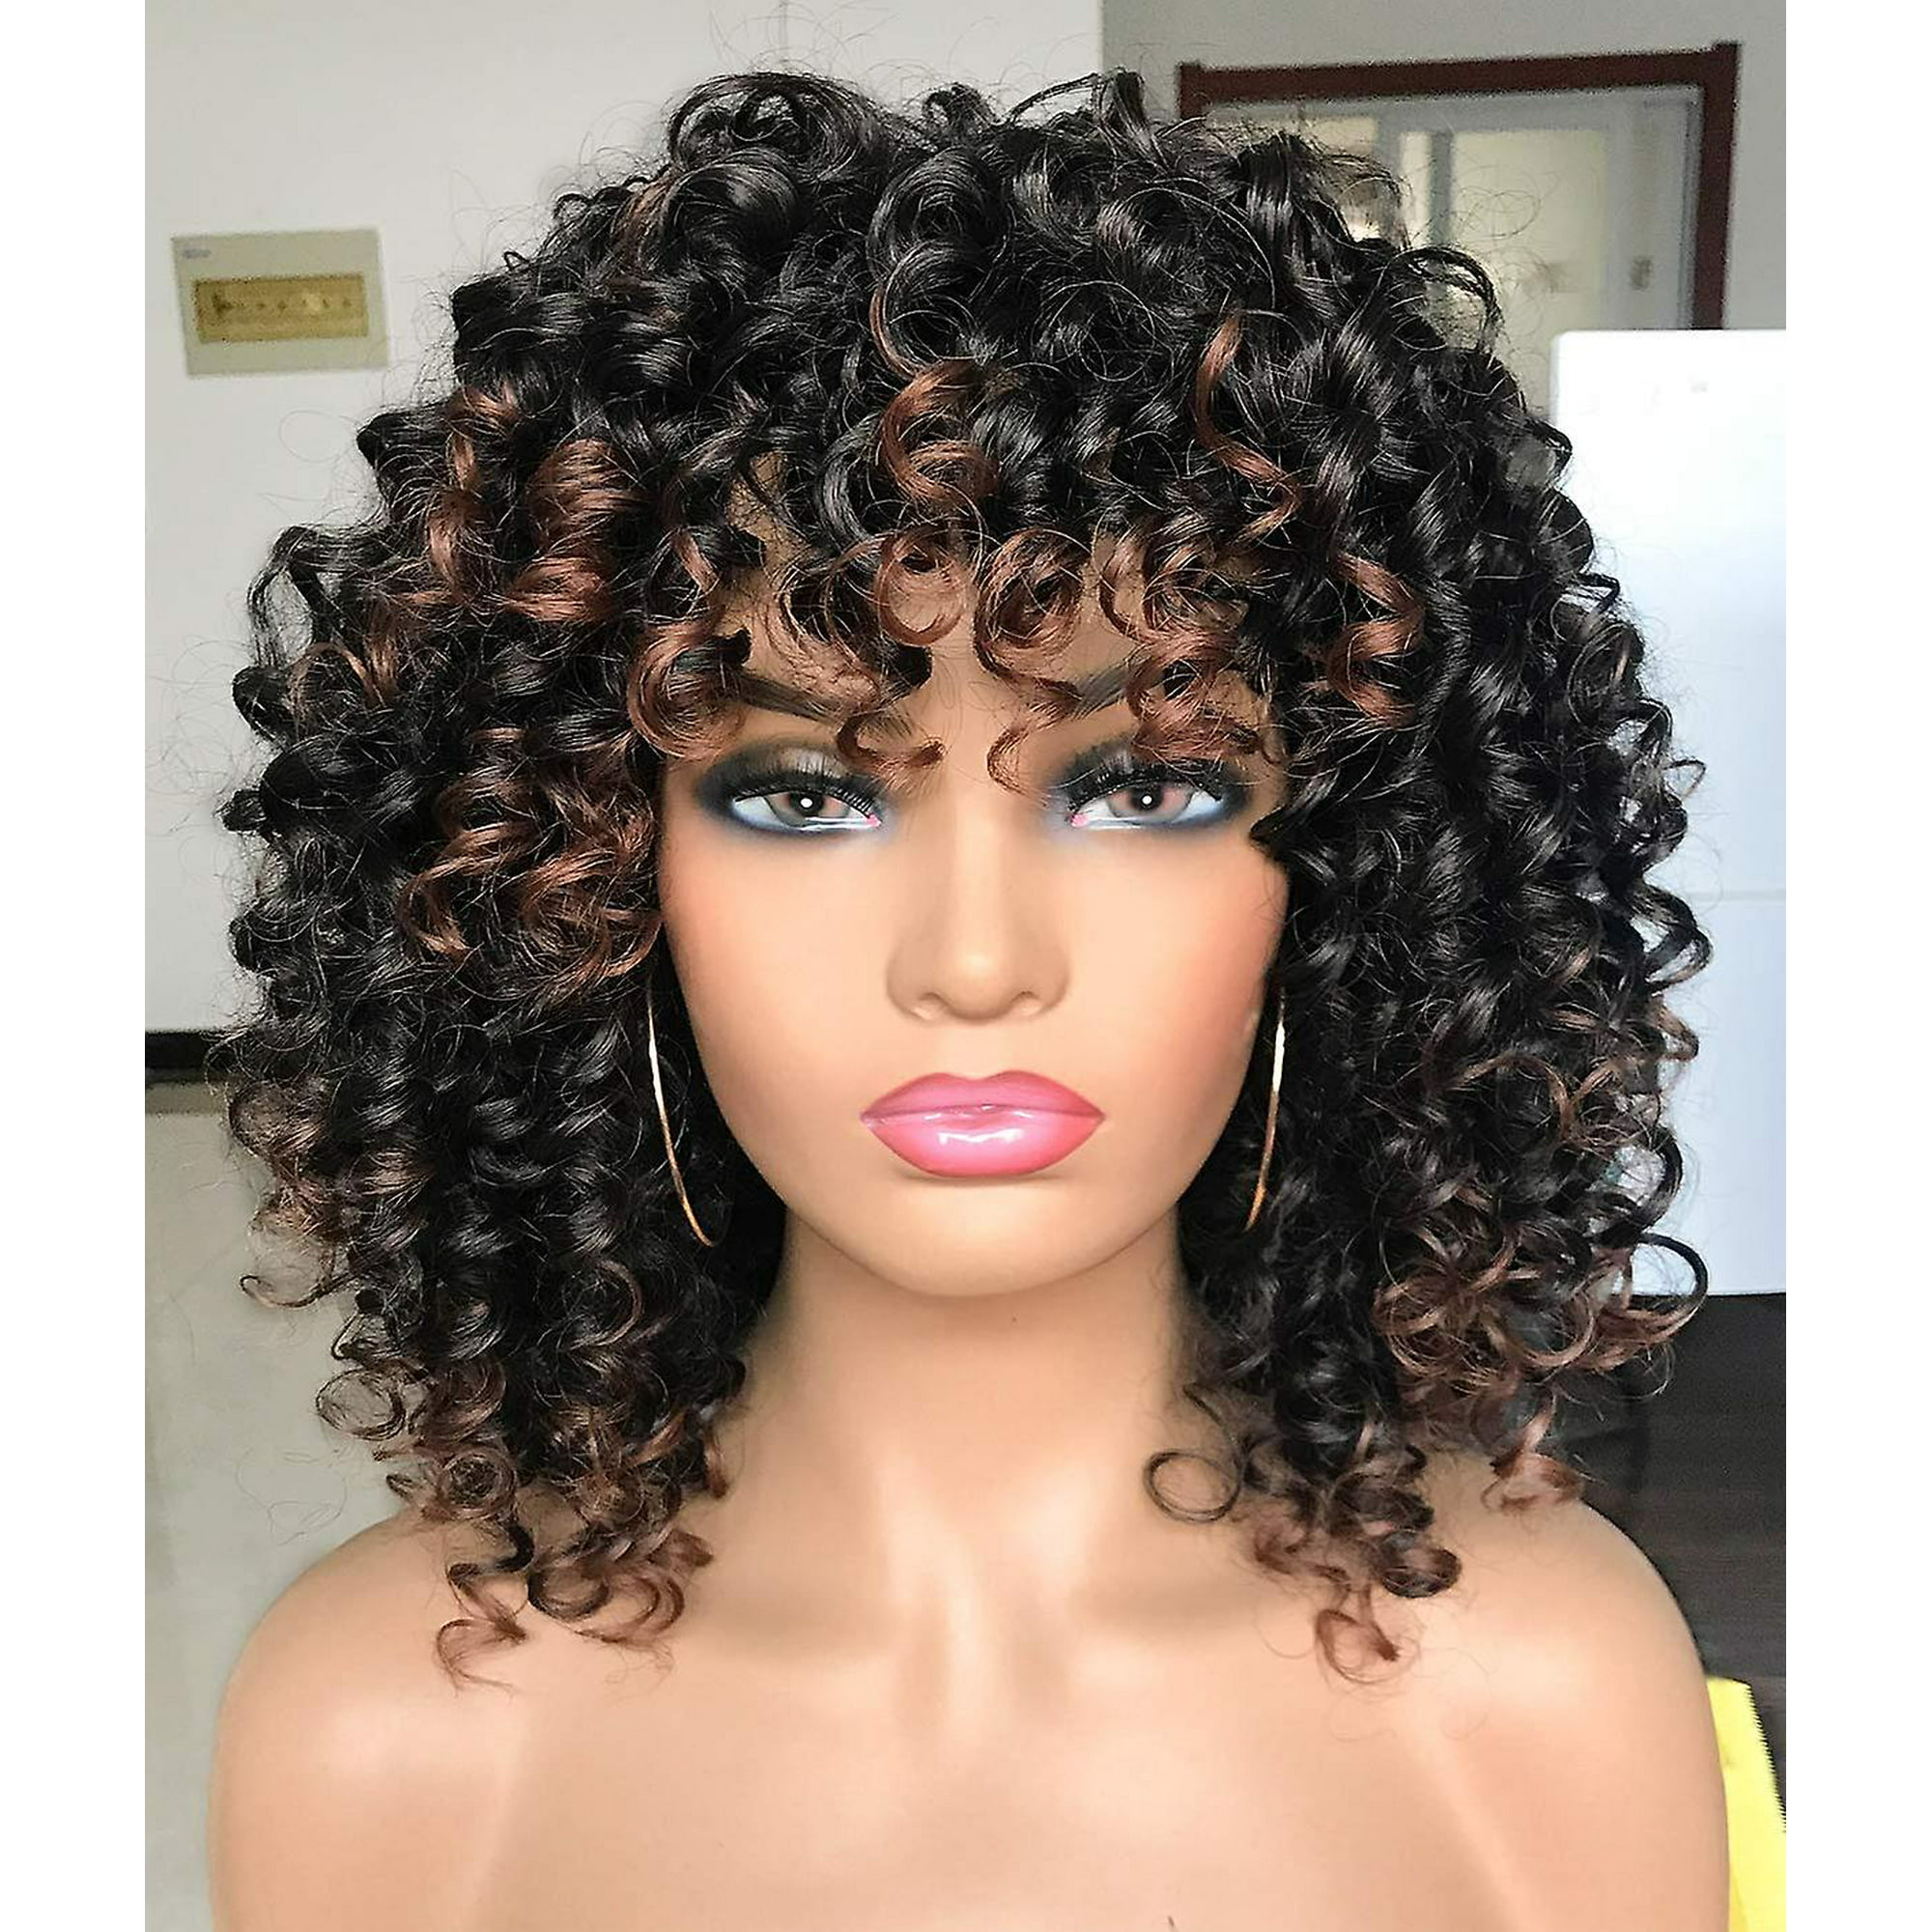 Afro Curly Wigs Black With Warm Brown Highlights Wigs With Bangs For Black  Women Natural Looking For Daily Wear (color: T1b/30) | Walmart Canada